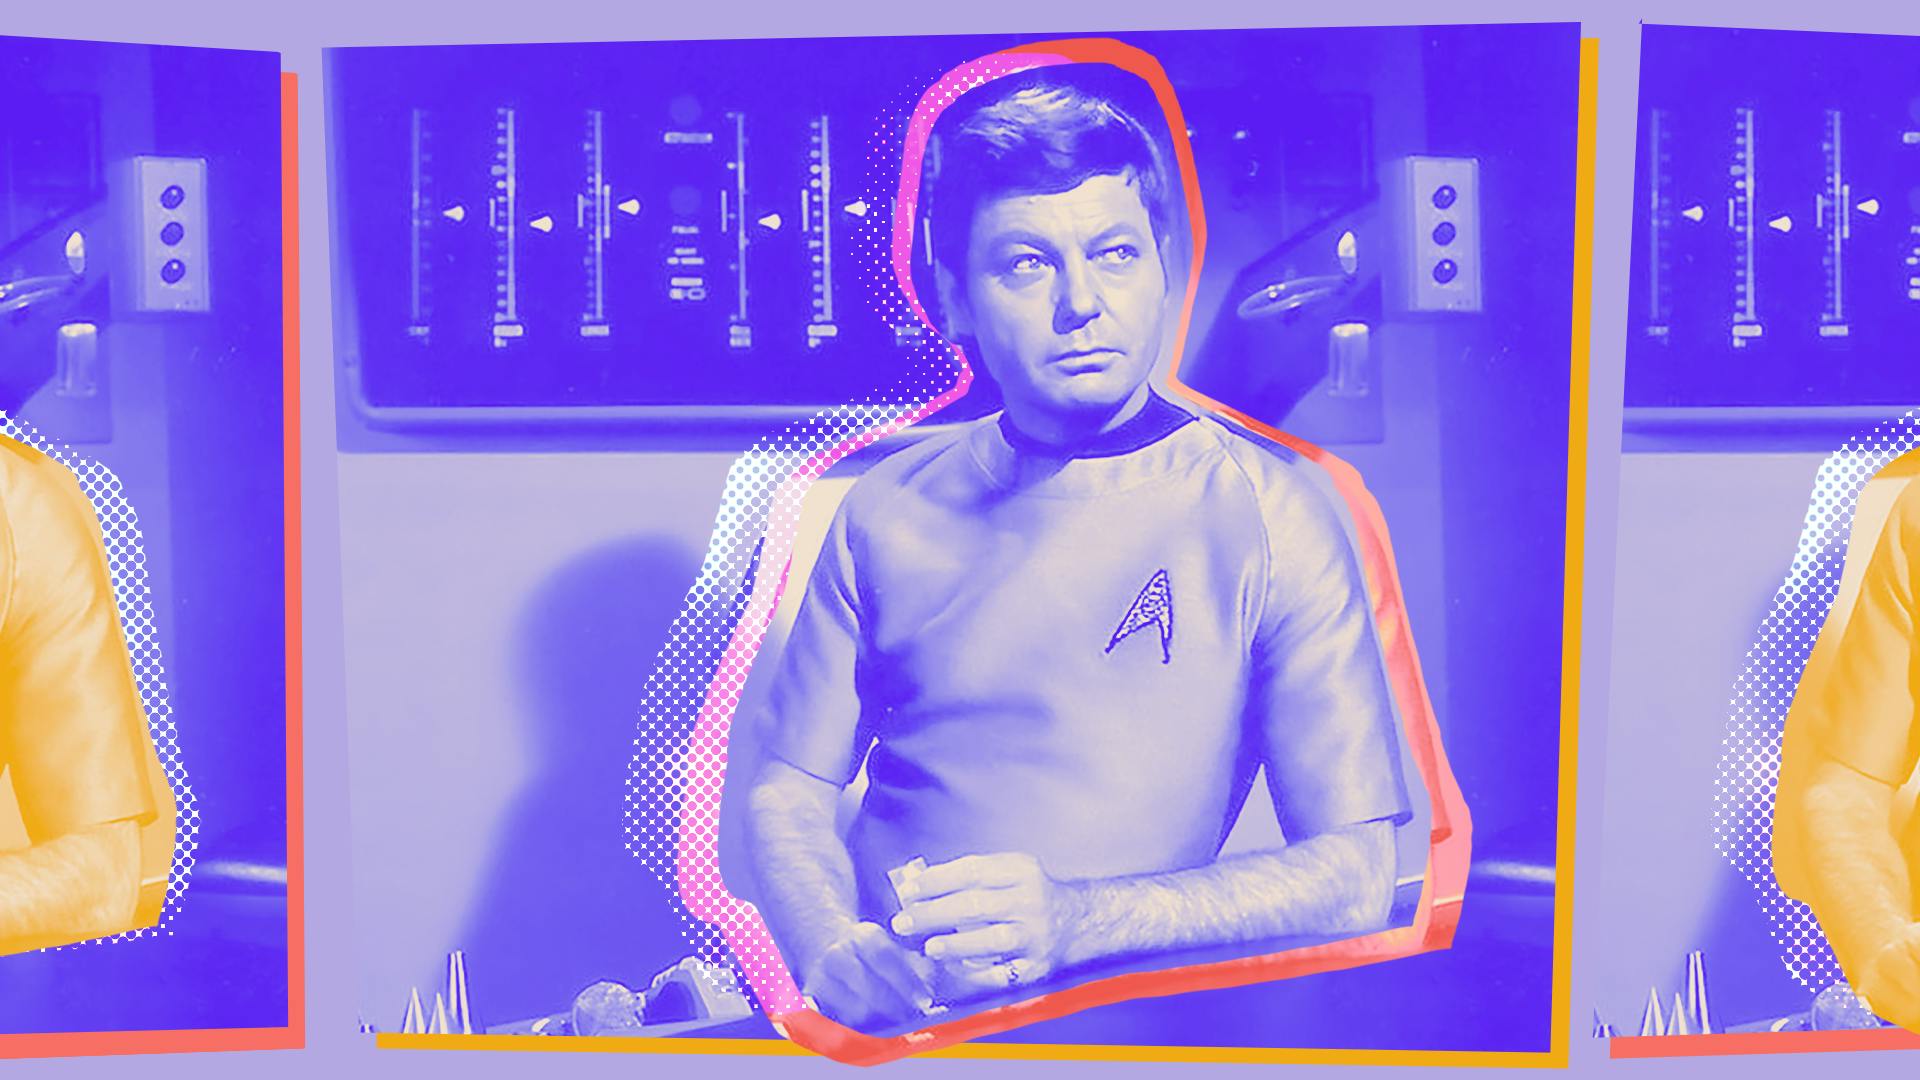 Stylized and filtered episodic still of McCoy seated in Sickbay as he looks towards his left